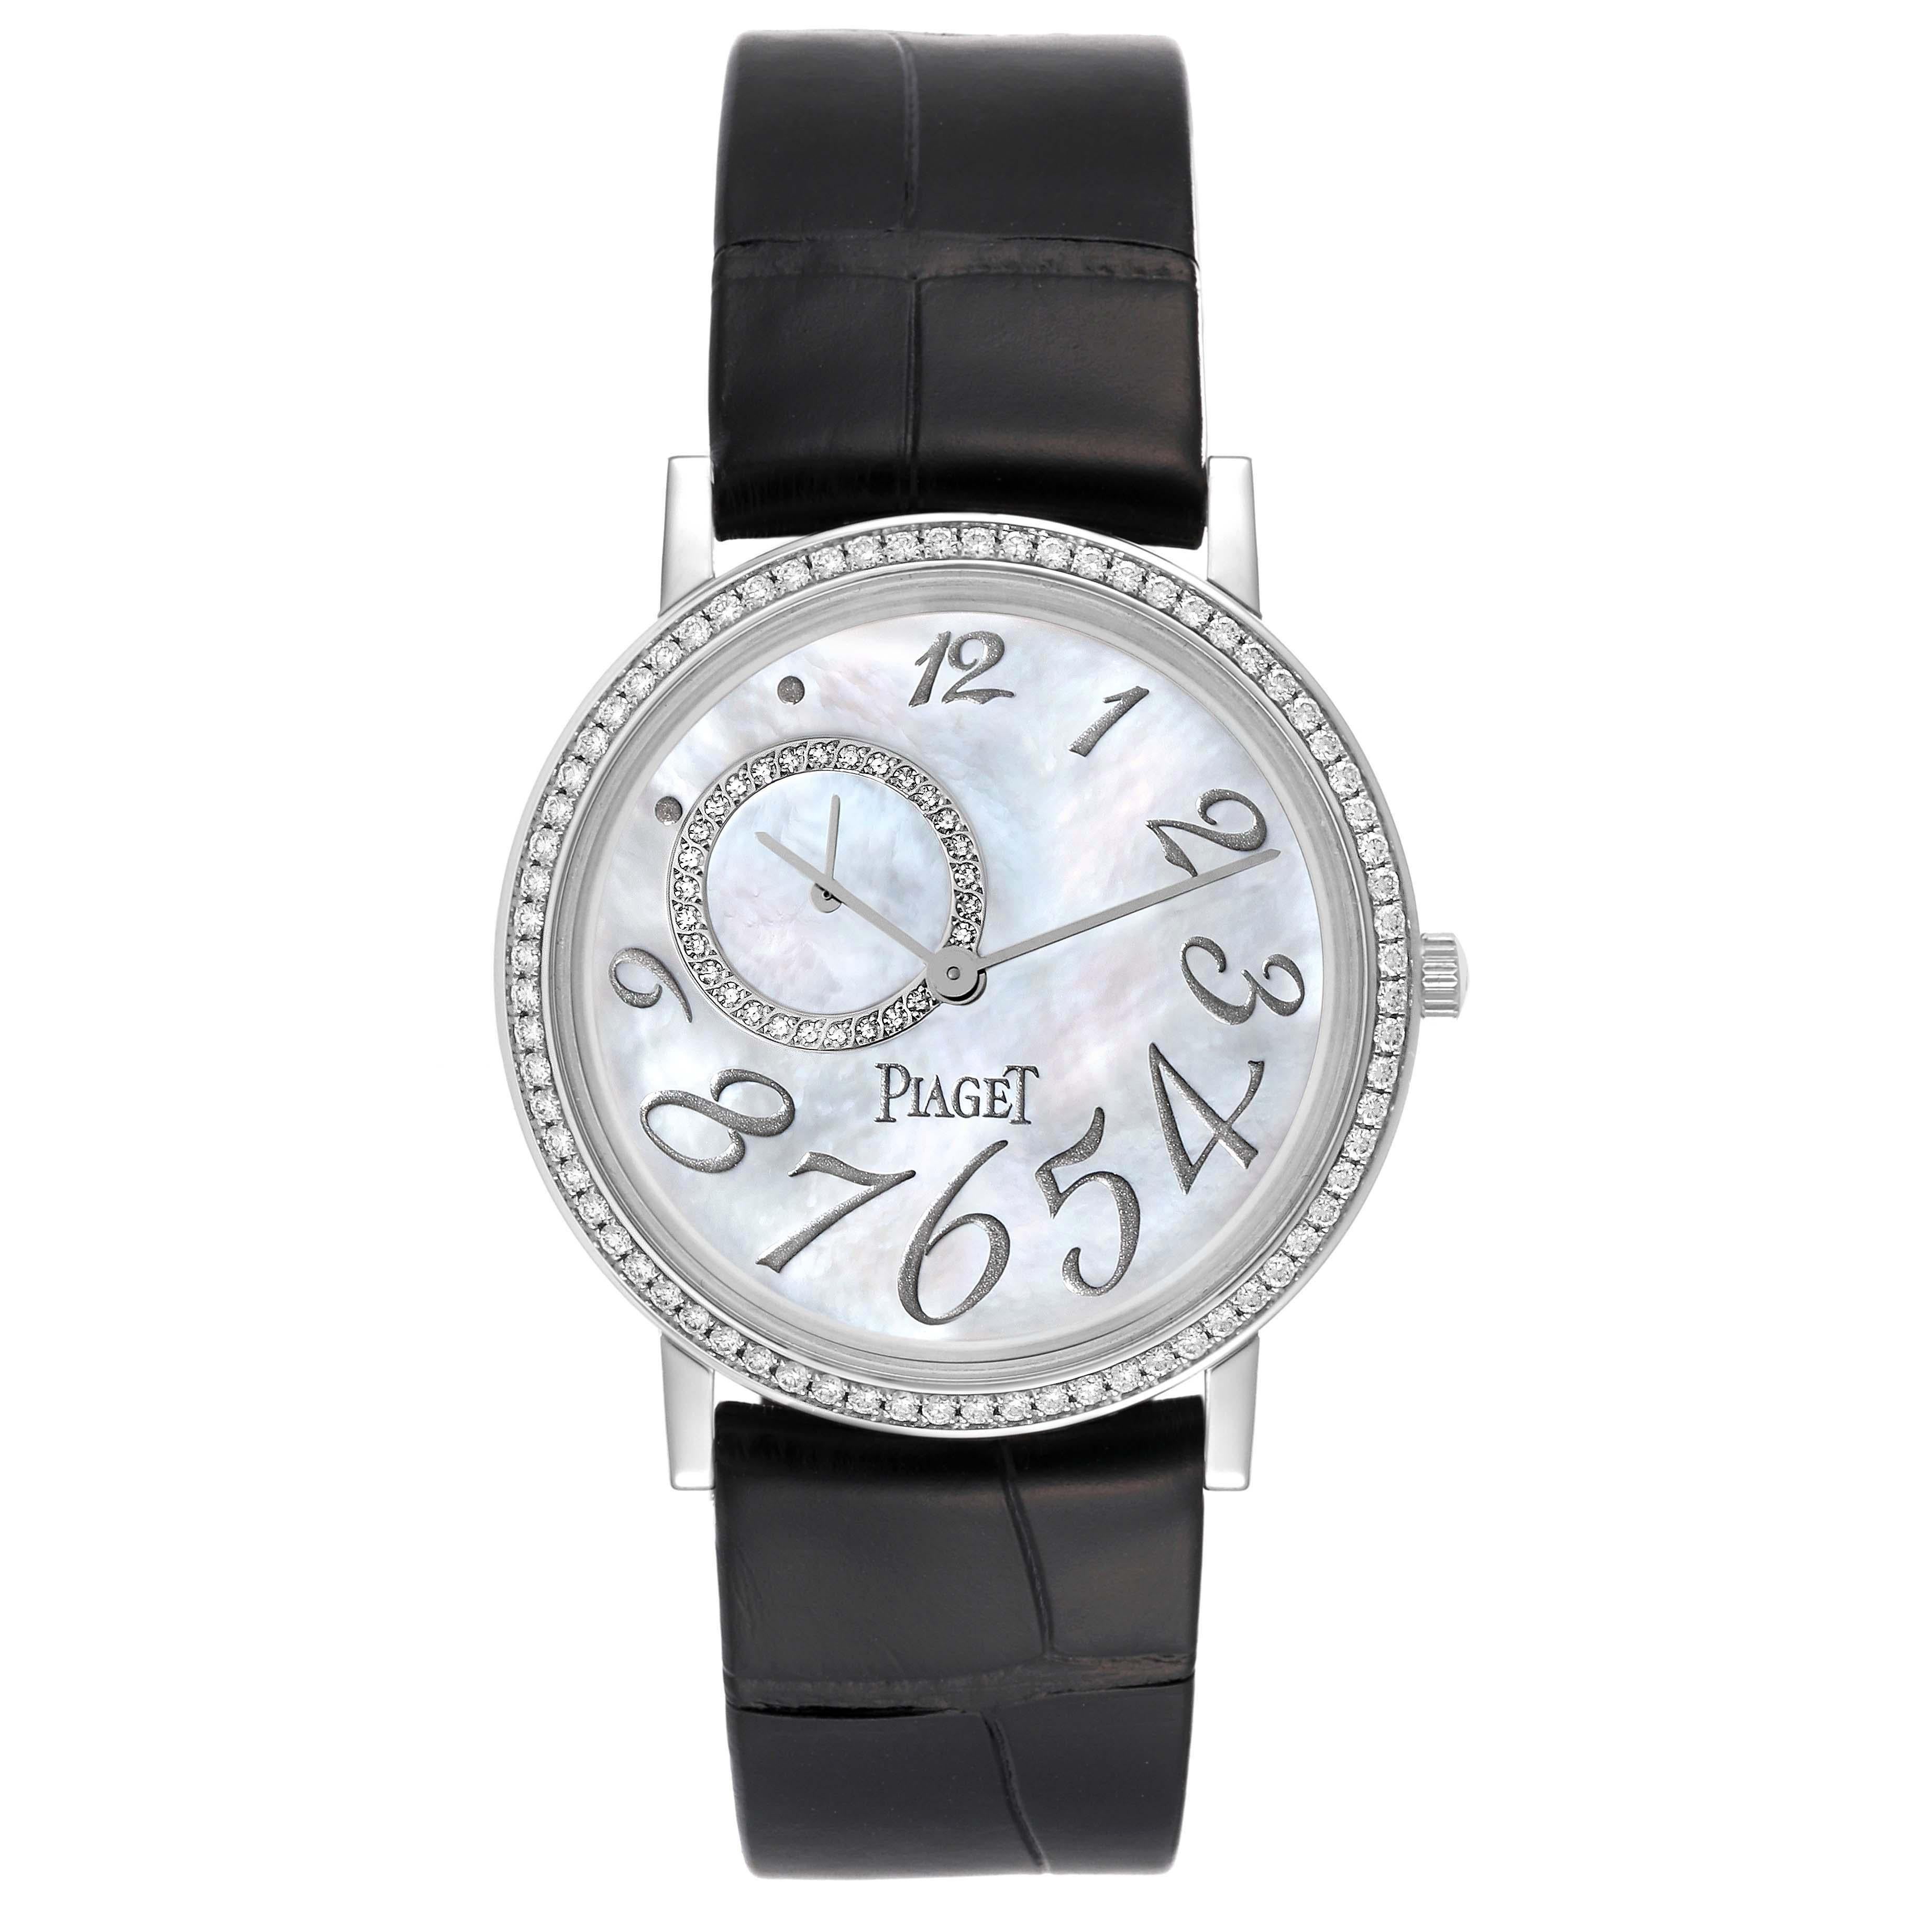 Piaget Altiplano Mother Of Pearl White Gold Diamond Mens Watch GOA31106. Manual winding movement. 18K white gold case 34.0 mm in diameter. Snap-on caseback. 18k white gold bezel set with original Piaget factory diamonds. Scratch resistant sapphire